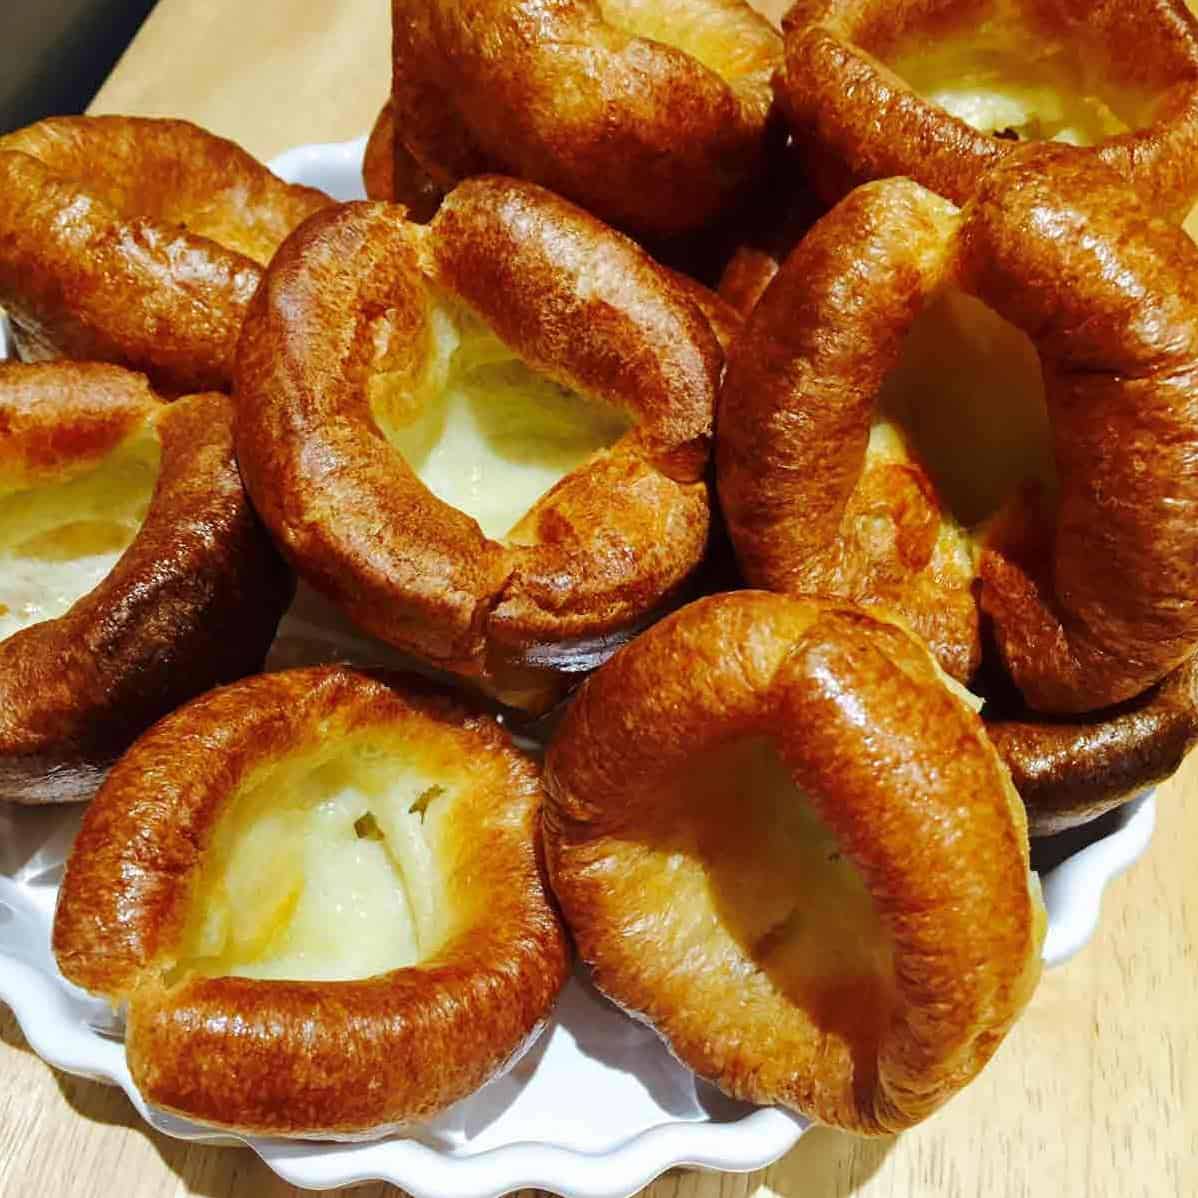  Add a pop of color to your plate with our delicious Yorkshire pudding recipe